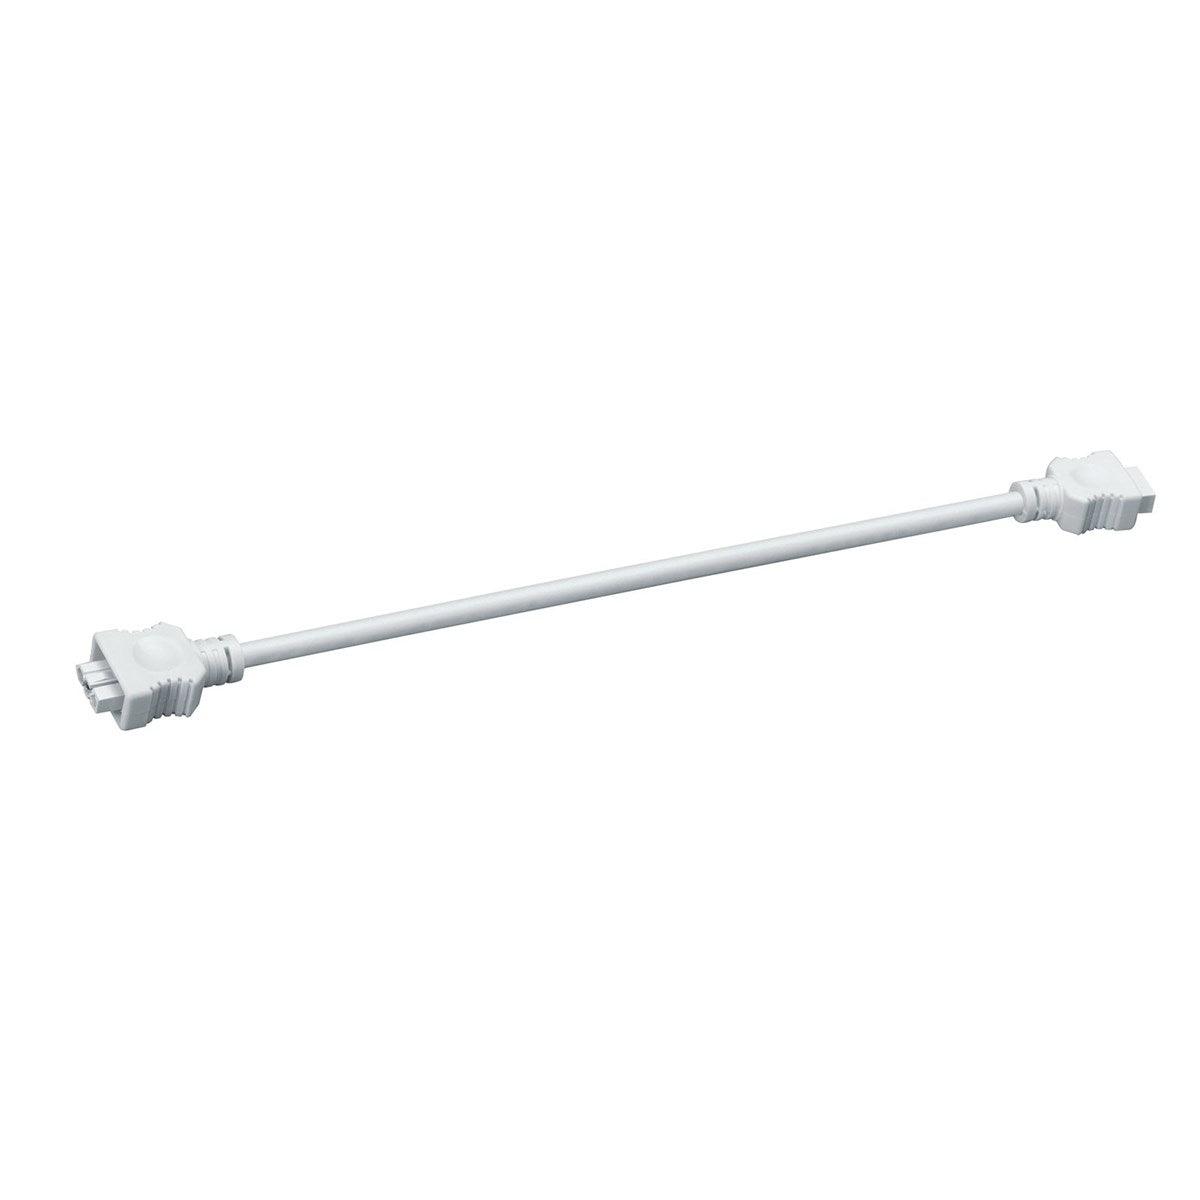 14in. Interconnect Cable for 6U Under cabinet lights, White - Bees Lighting